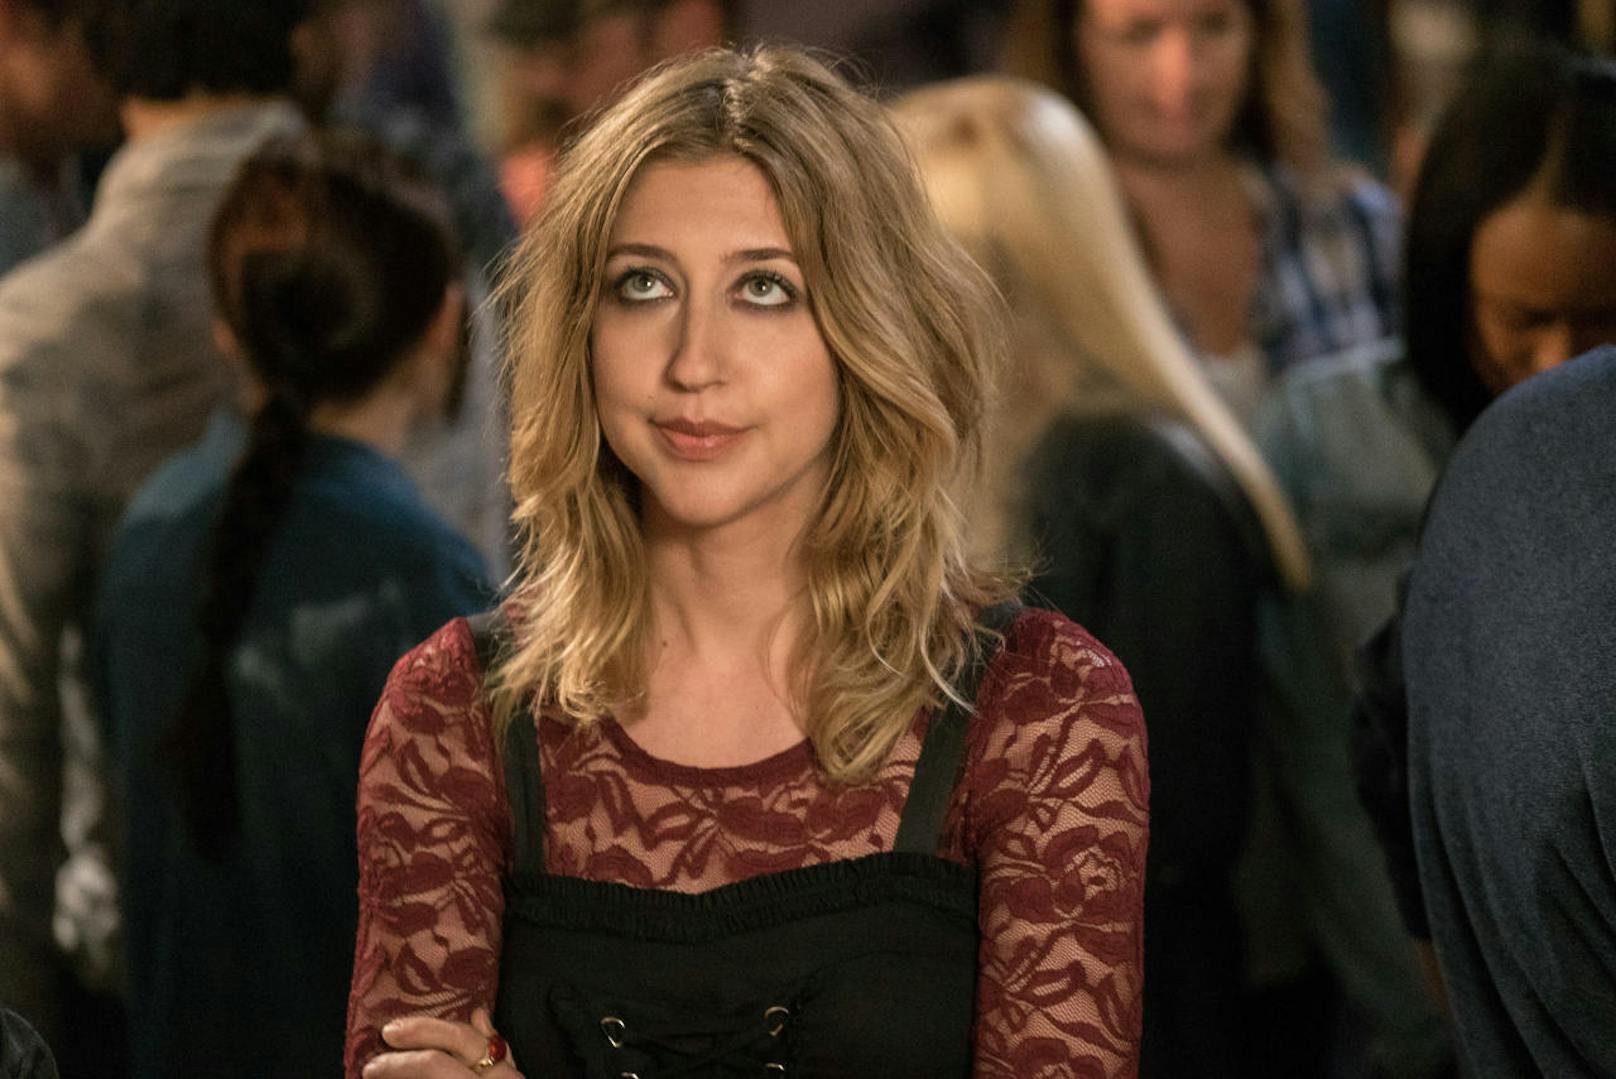 Heidi Gardner als Leonor in "How to Party with Mum"